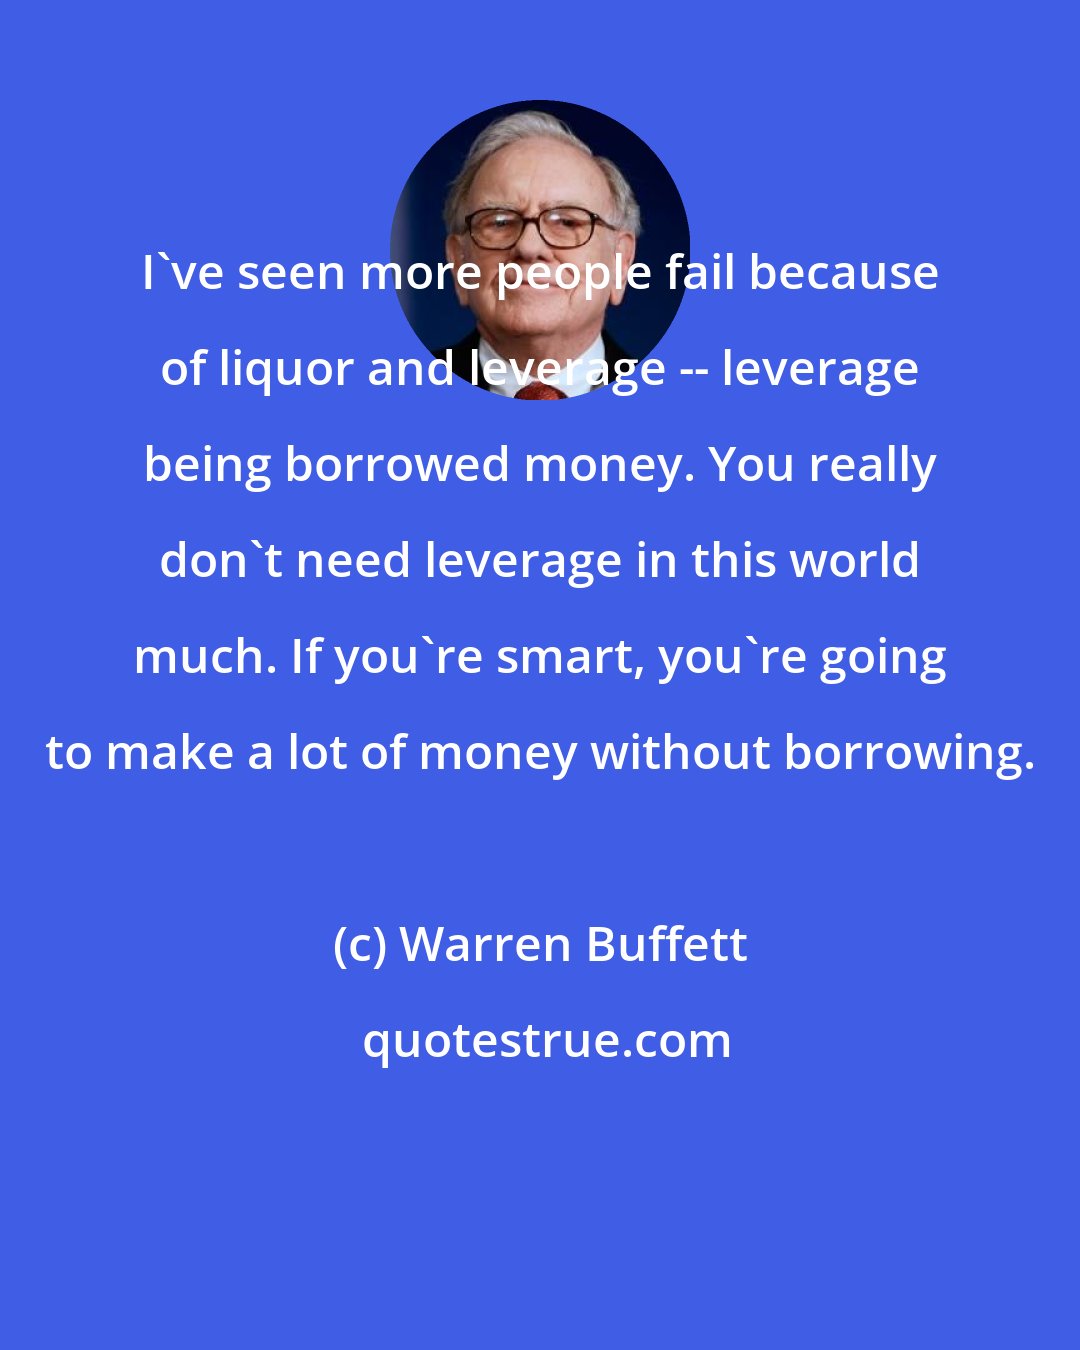 Warren Buffett: I've seen more people fail because of liquor and leverage -- leverage being borrowed money. You really don't need leverage in this world much. If you're smart, you're going to make a lot of money without borrowing.